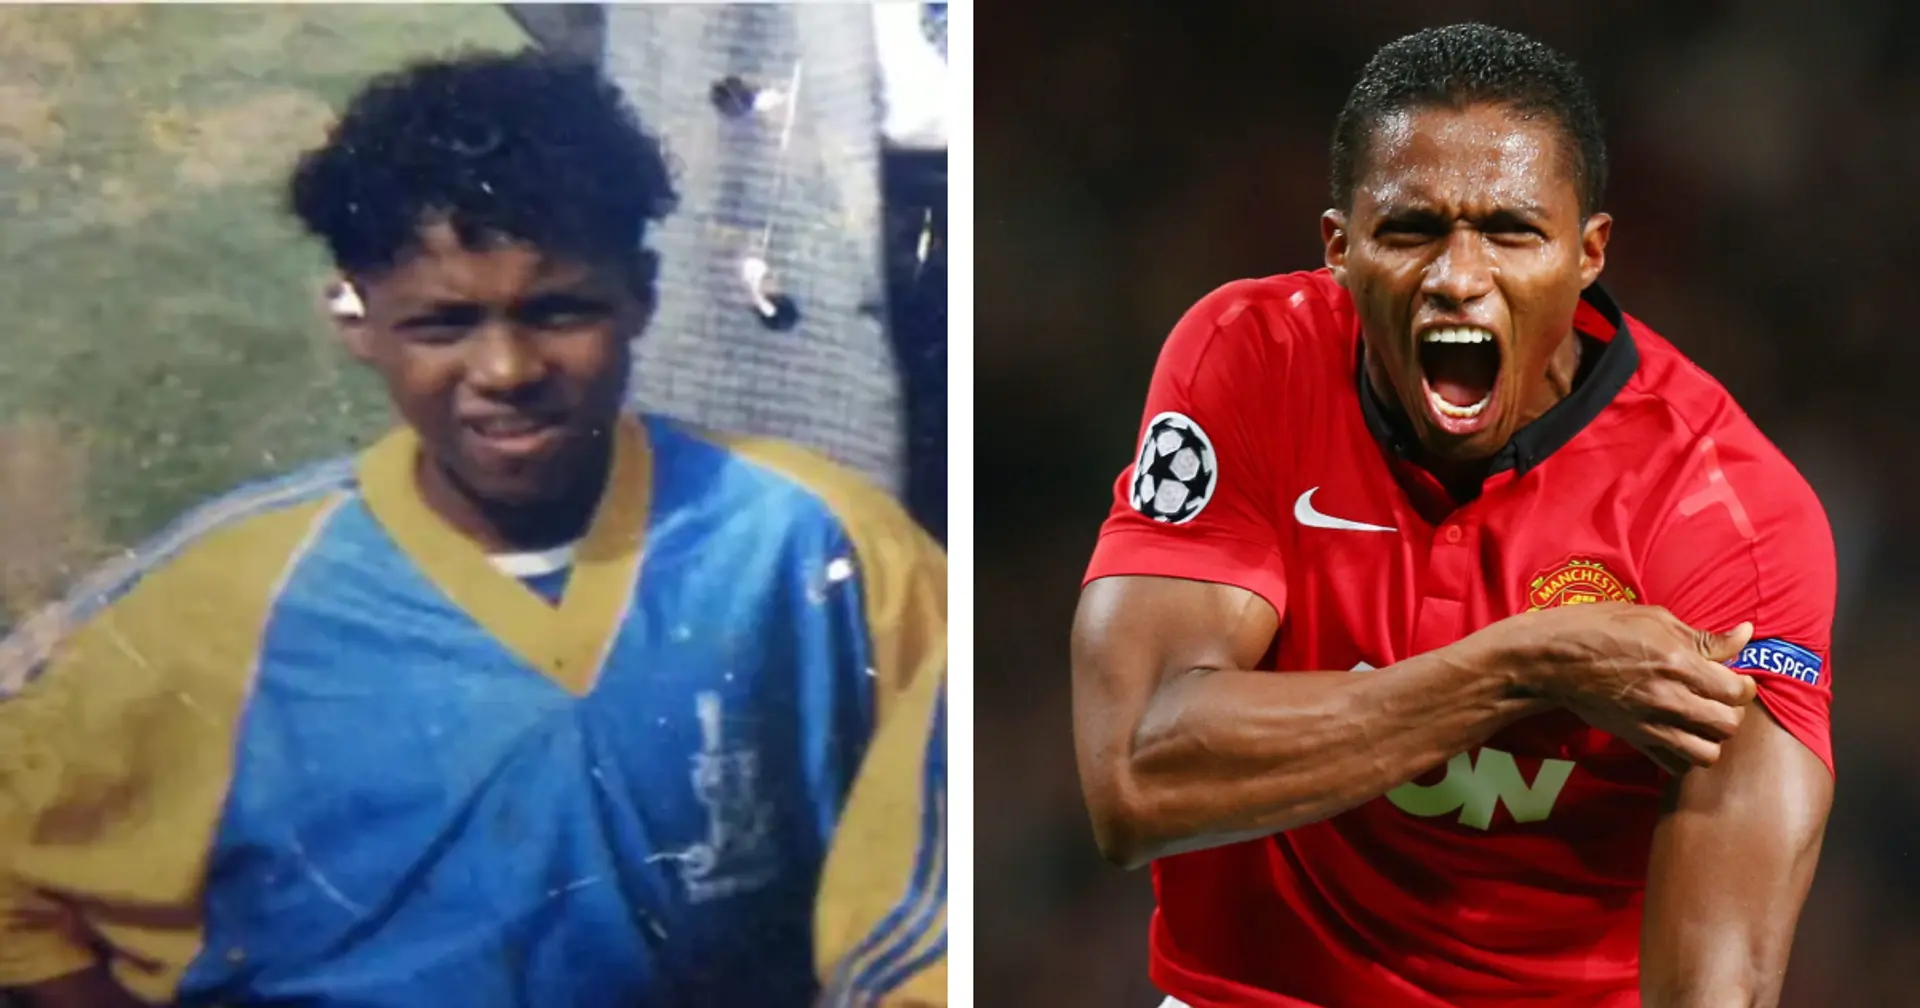 From collecting glass bottles and wearing ripped plimsolls to playing for Man United: Antonio Valencia's life story is one of grit